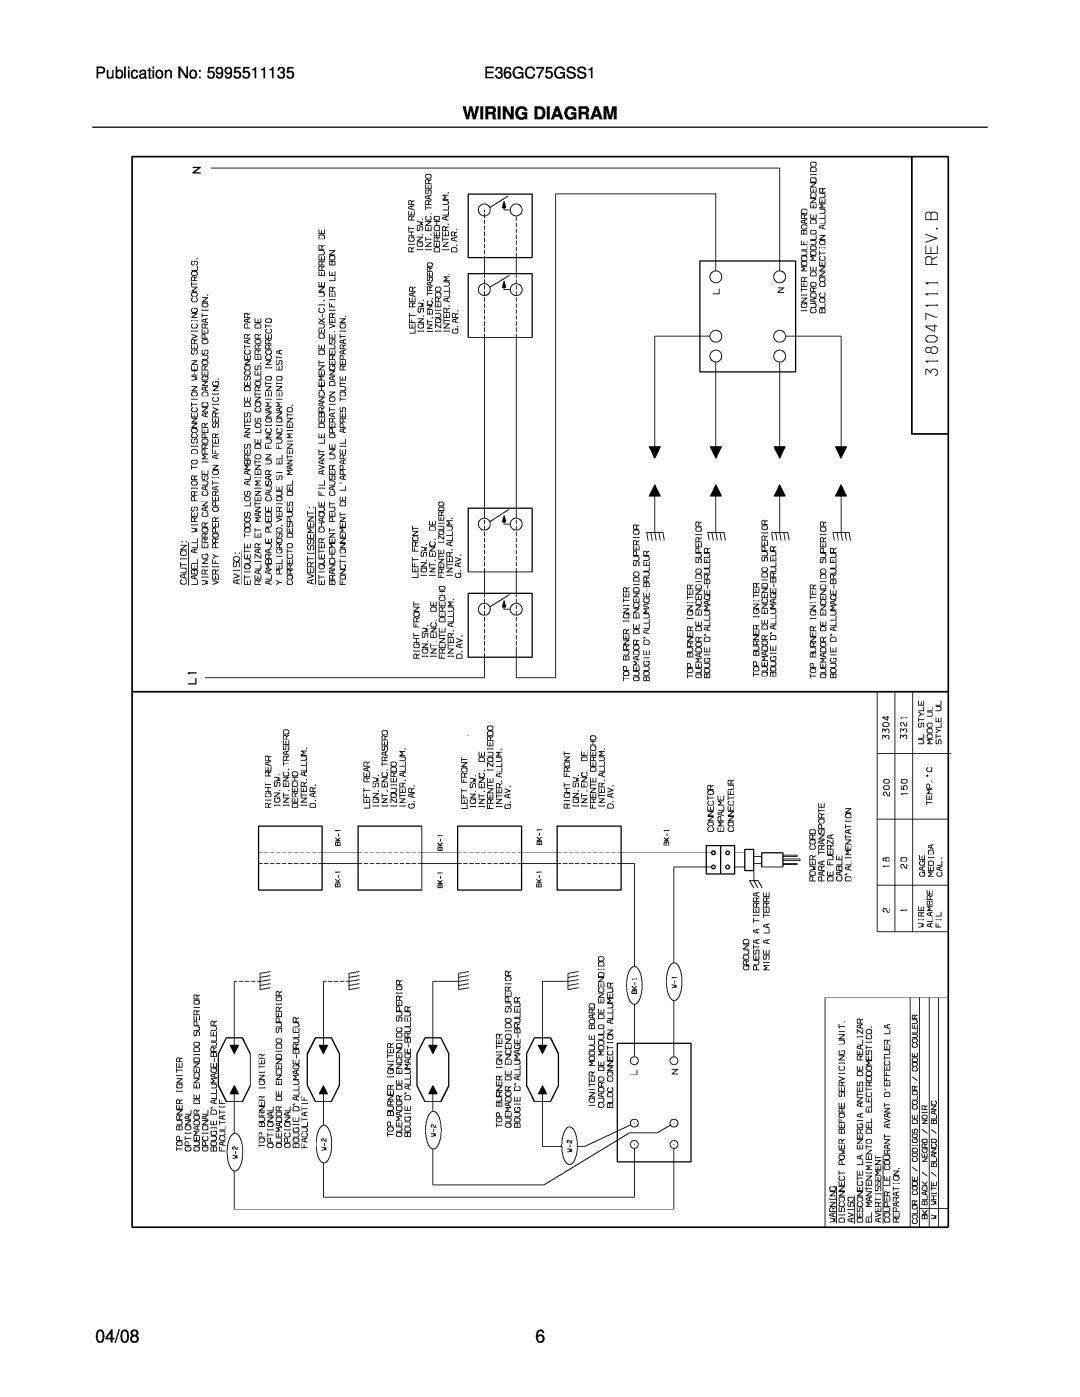 Electrolux E36GC75GSS1, 37766426870S1 installation instructions Wiring Diagram, 04/08 